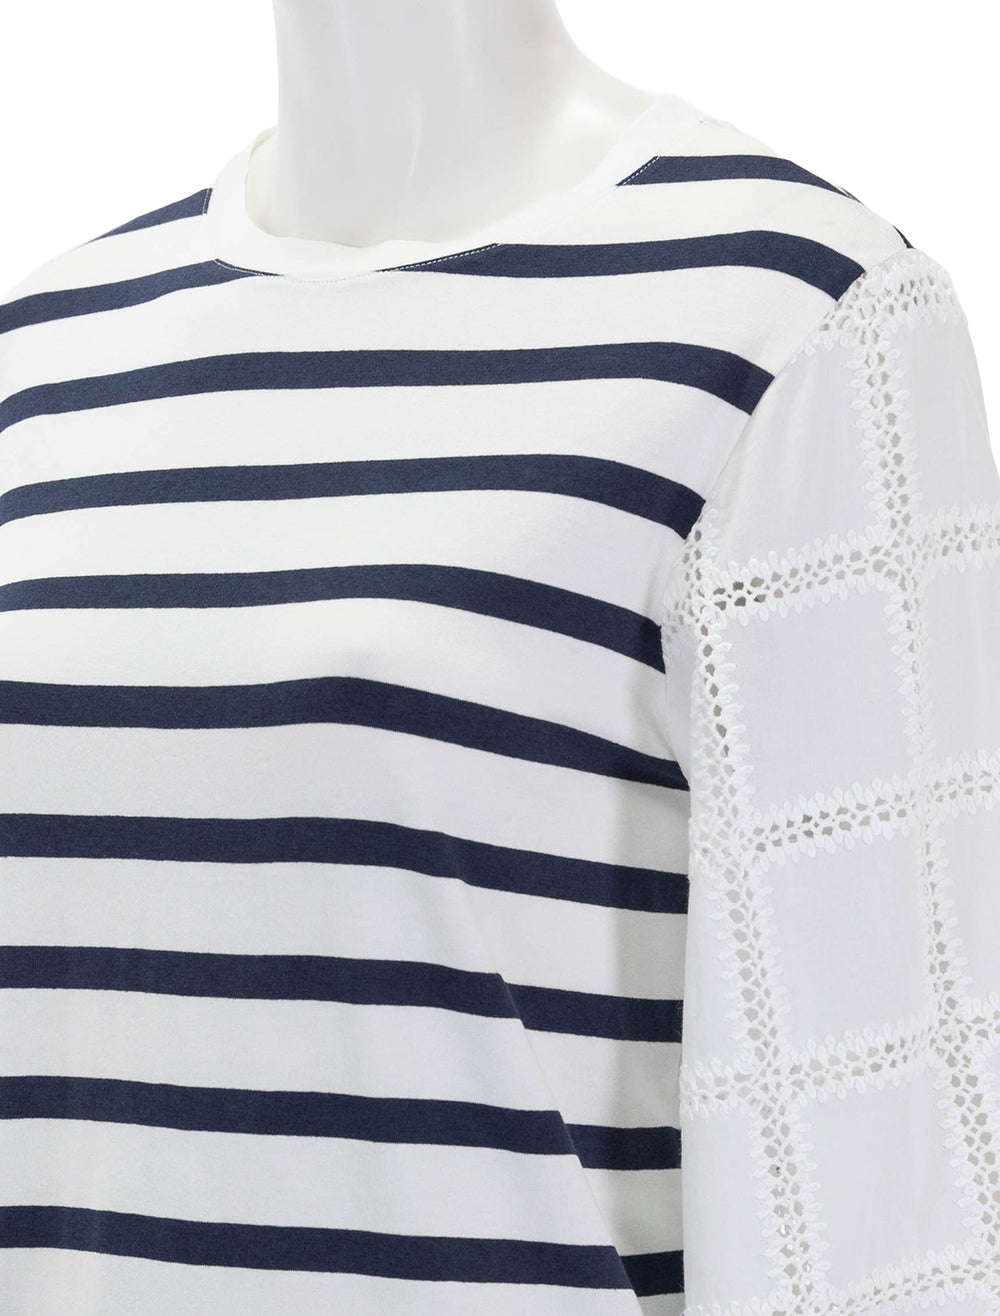 Close-up view of Vilagallo's eugen top in navy and white.